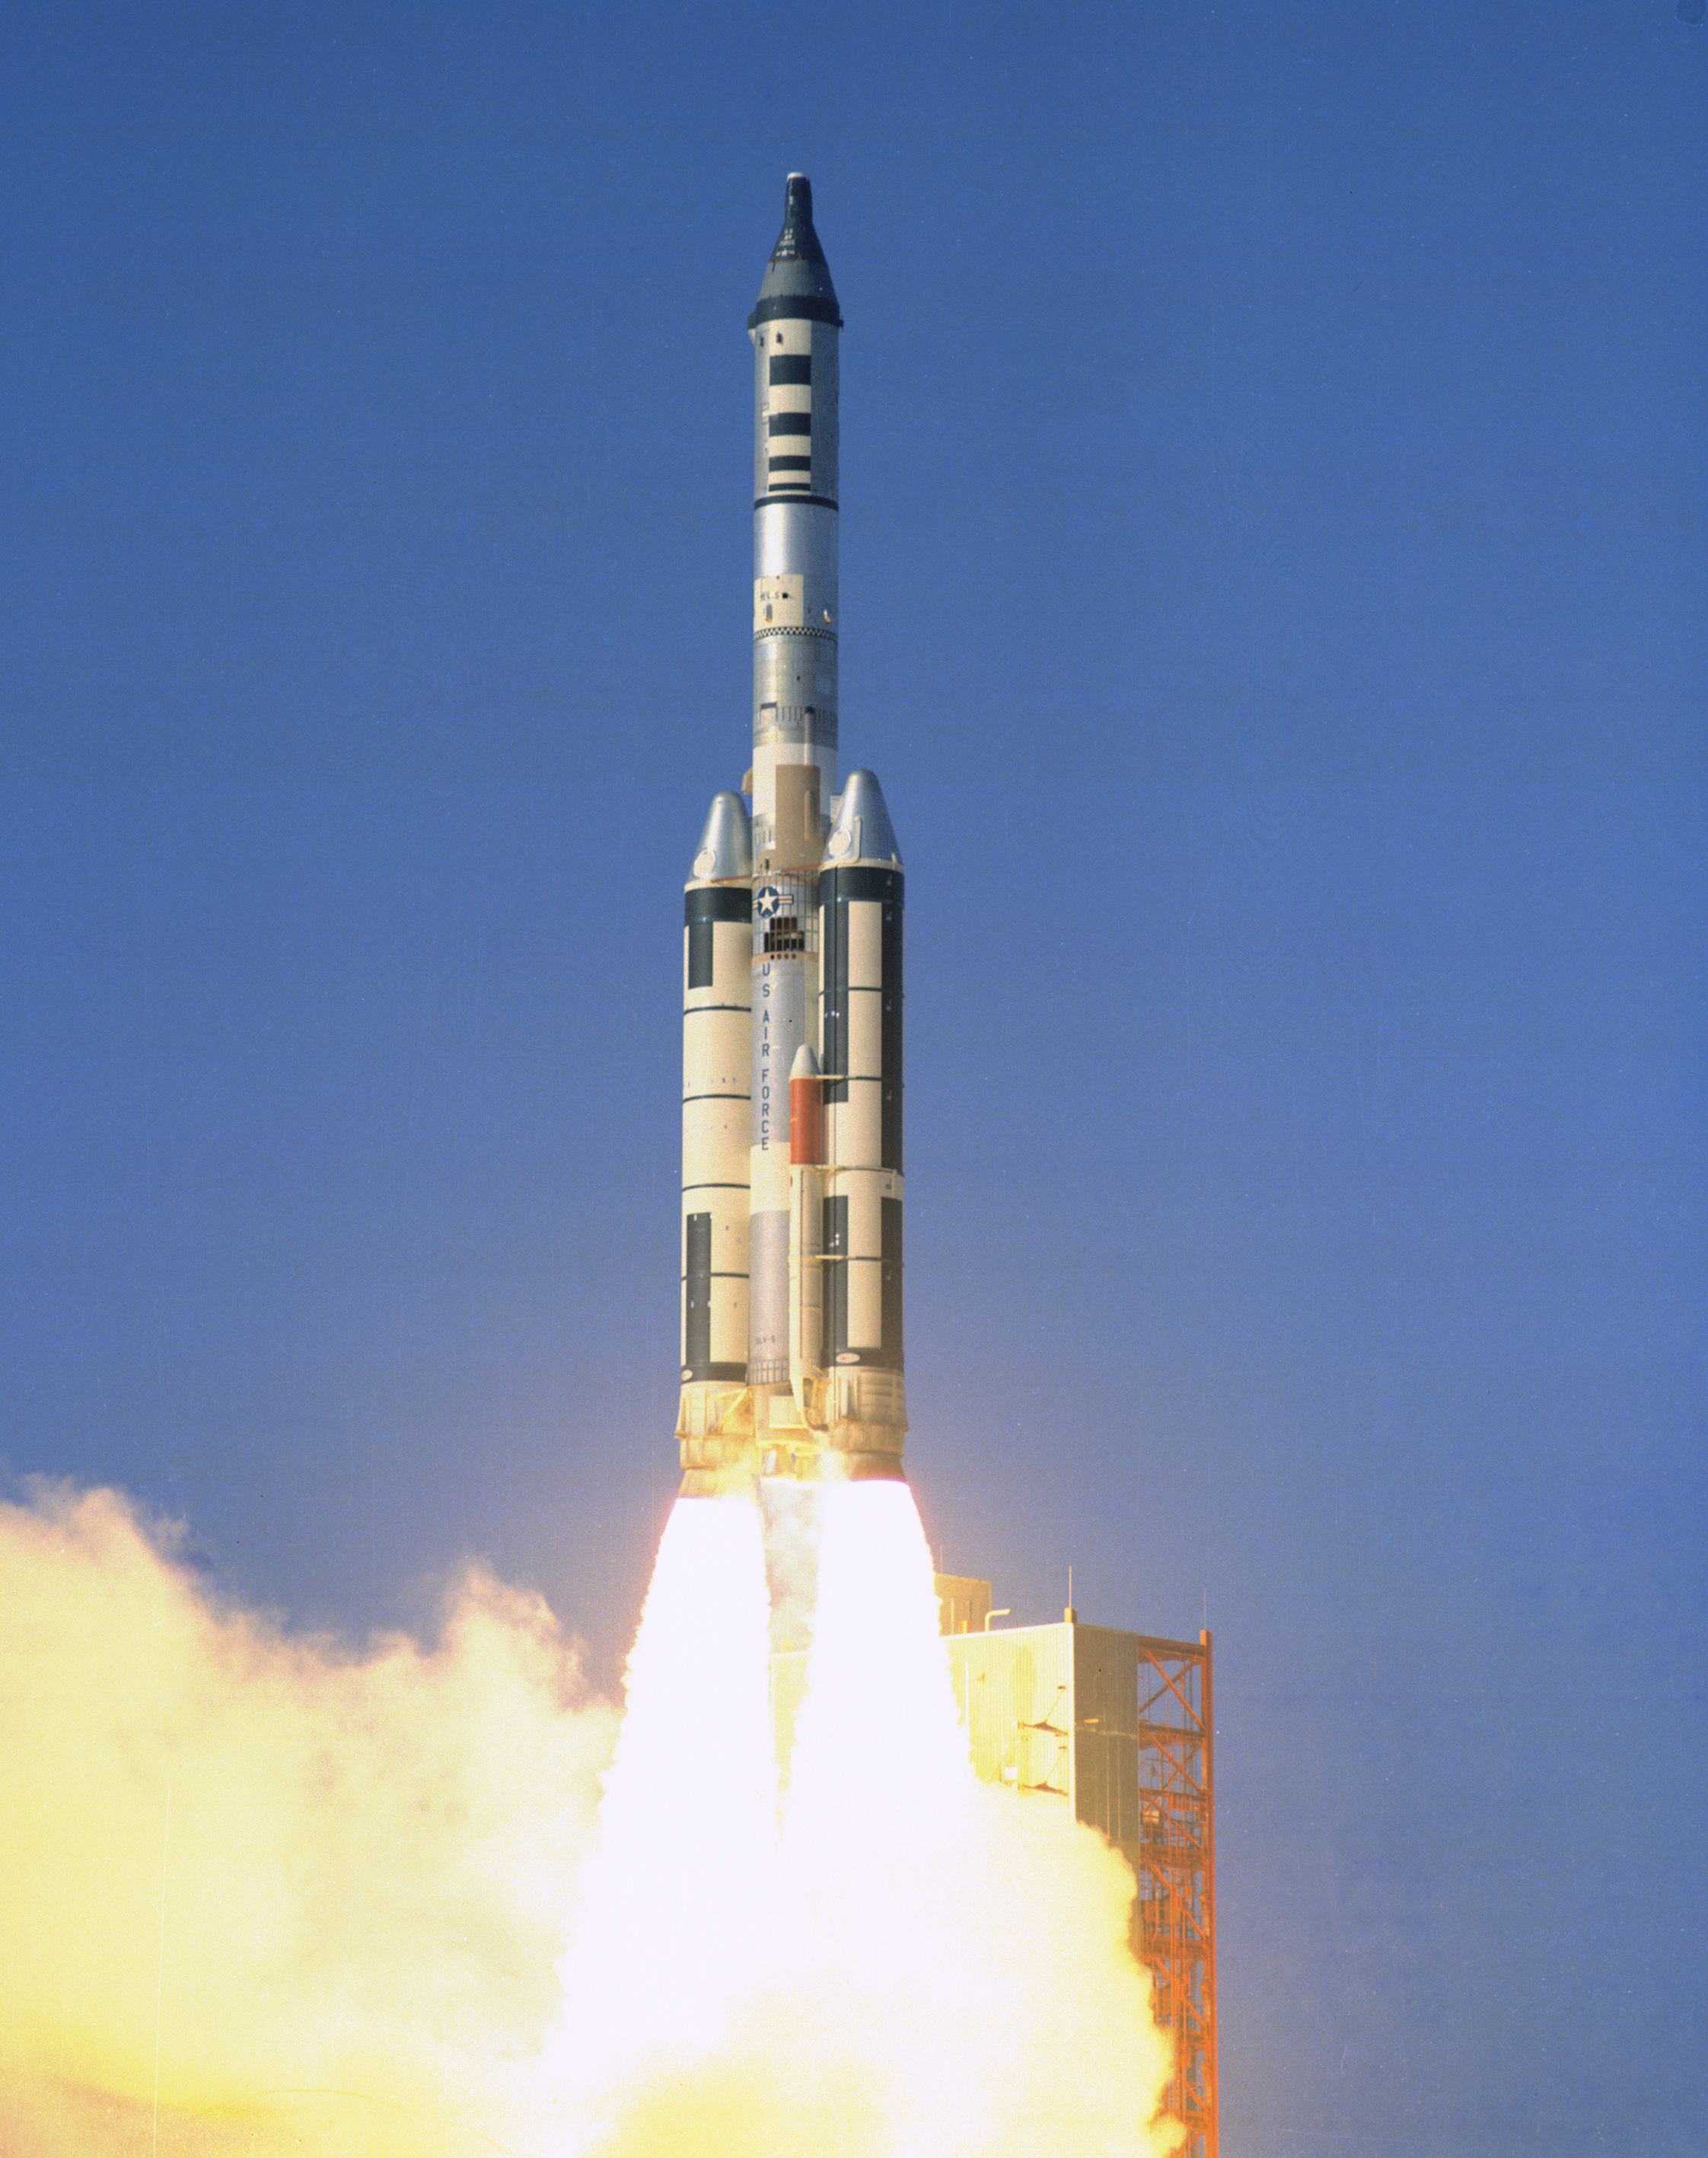 The only operational launch of the Manned Orbiting Laboratory (MOL) program, a Gemini-B capsule and a MOL mockup atop a Titan-IIIC rocket in 1966